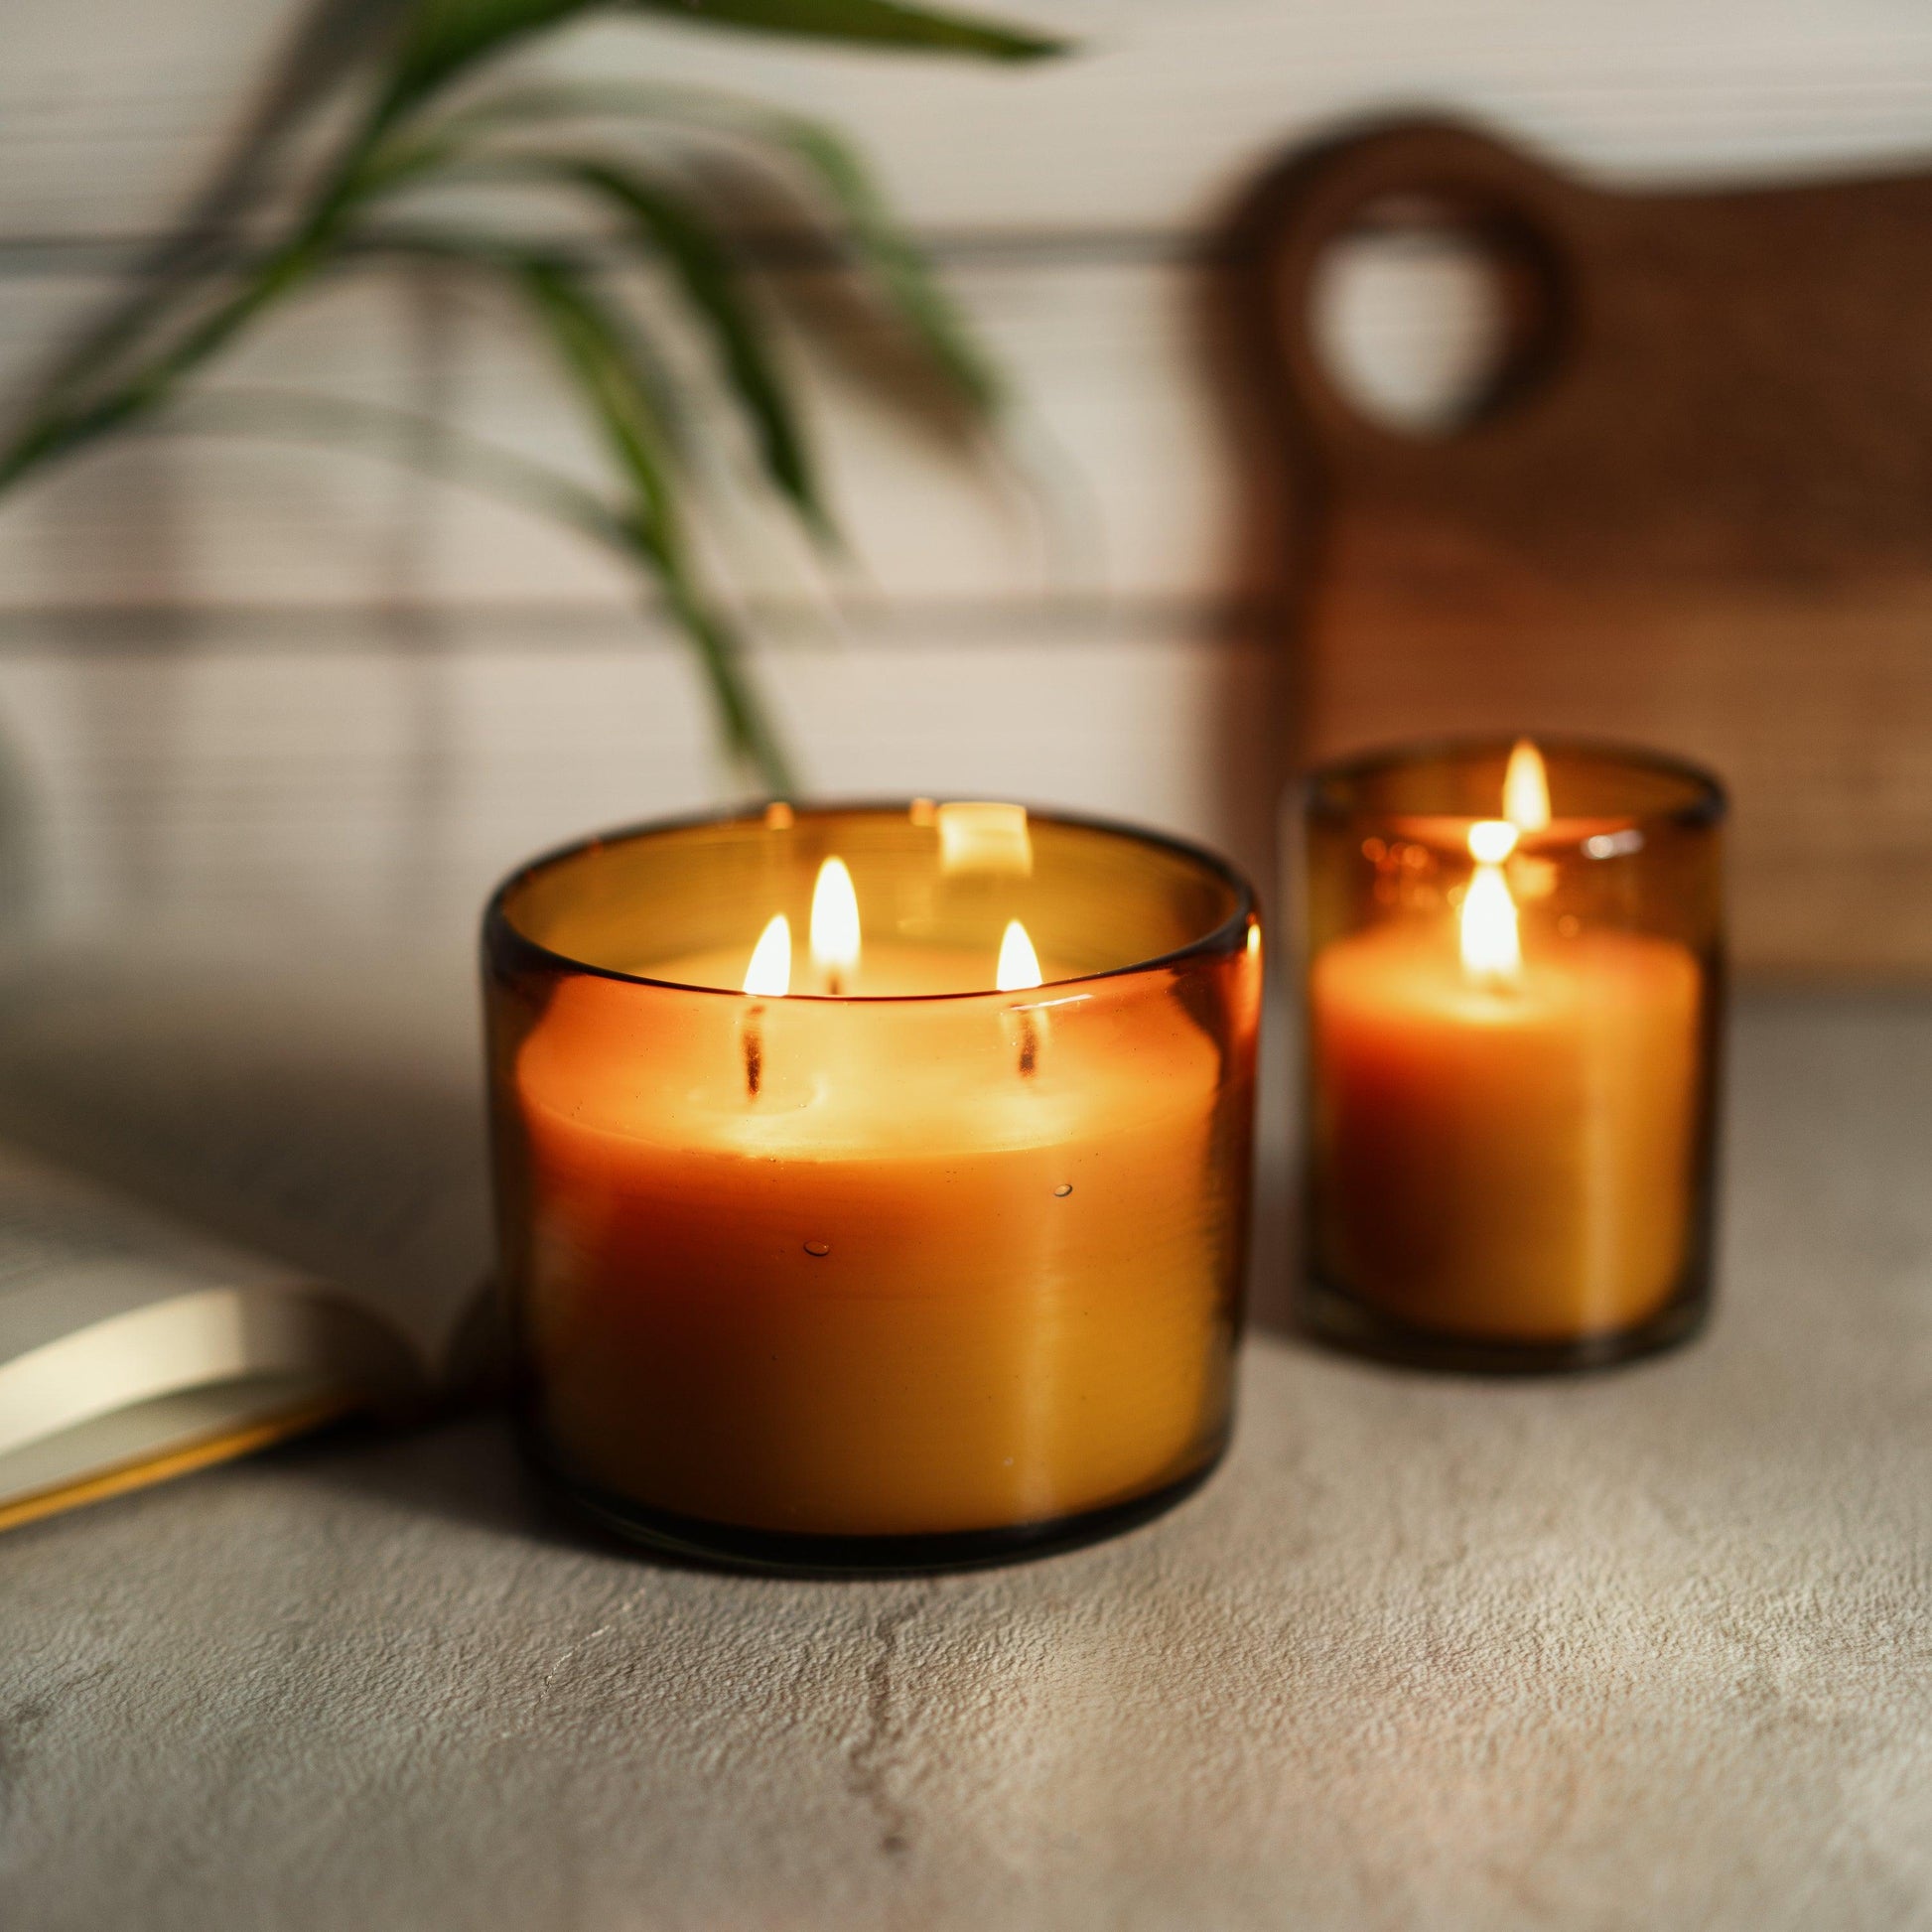 All Natural Beeswax Jar Candle Sets - Recycled Glass Jars